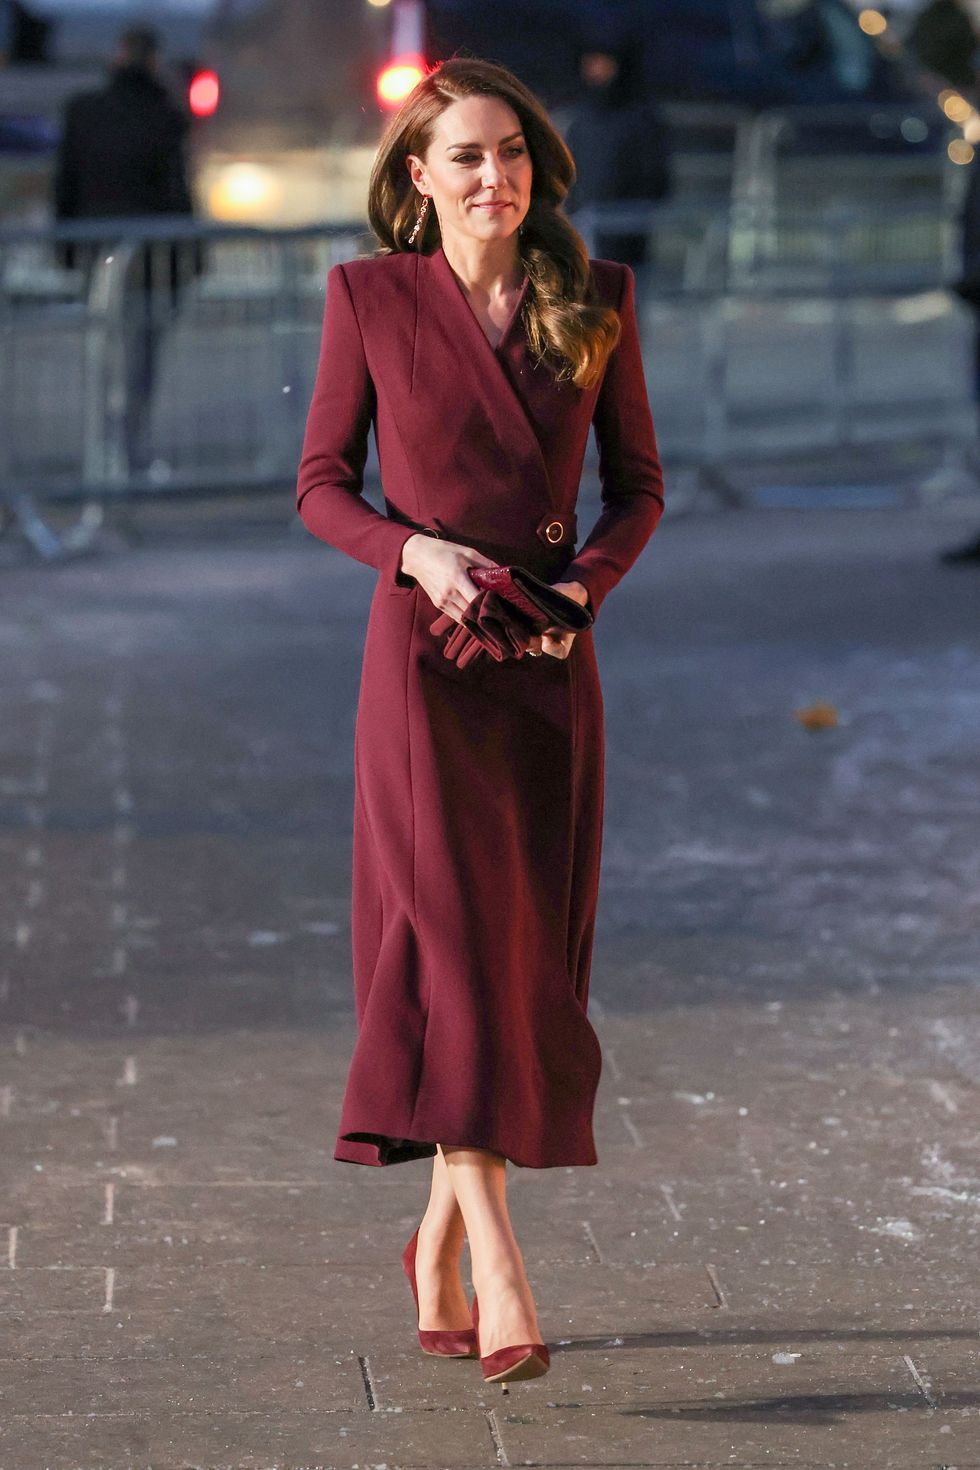 Kate Middleton Wears A Lush Maroon Gown To The 2022 Christmas Carol Service